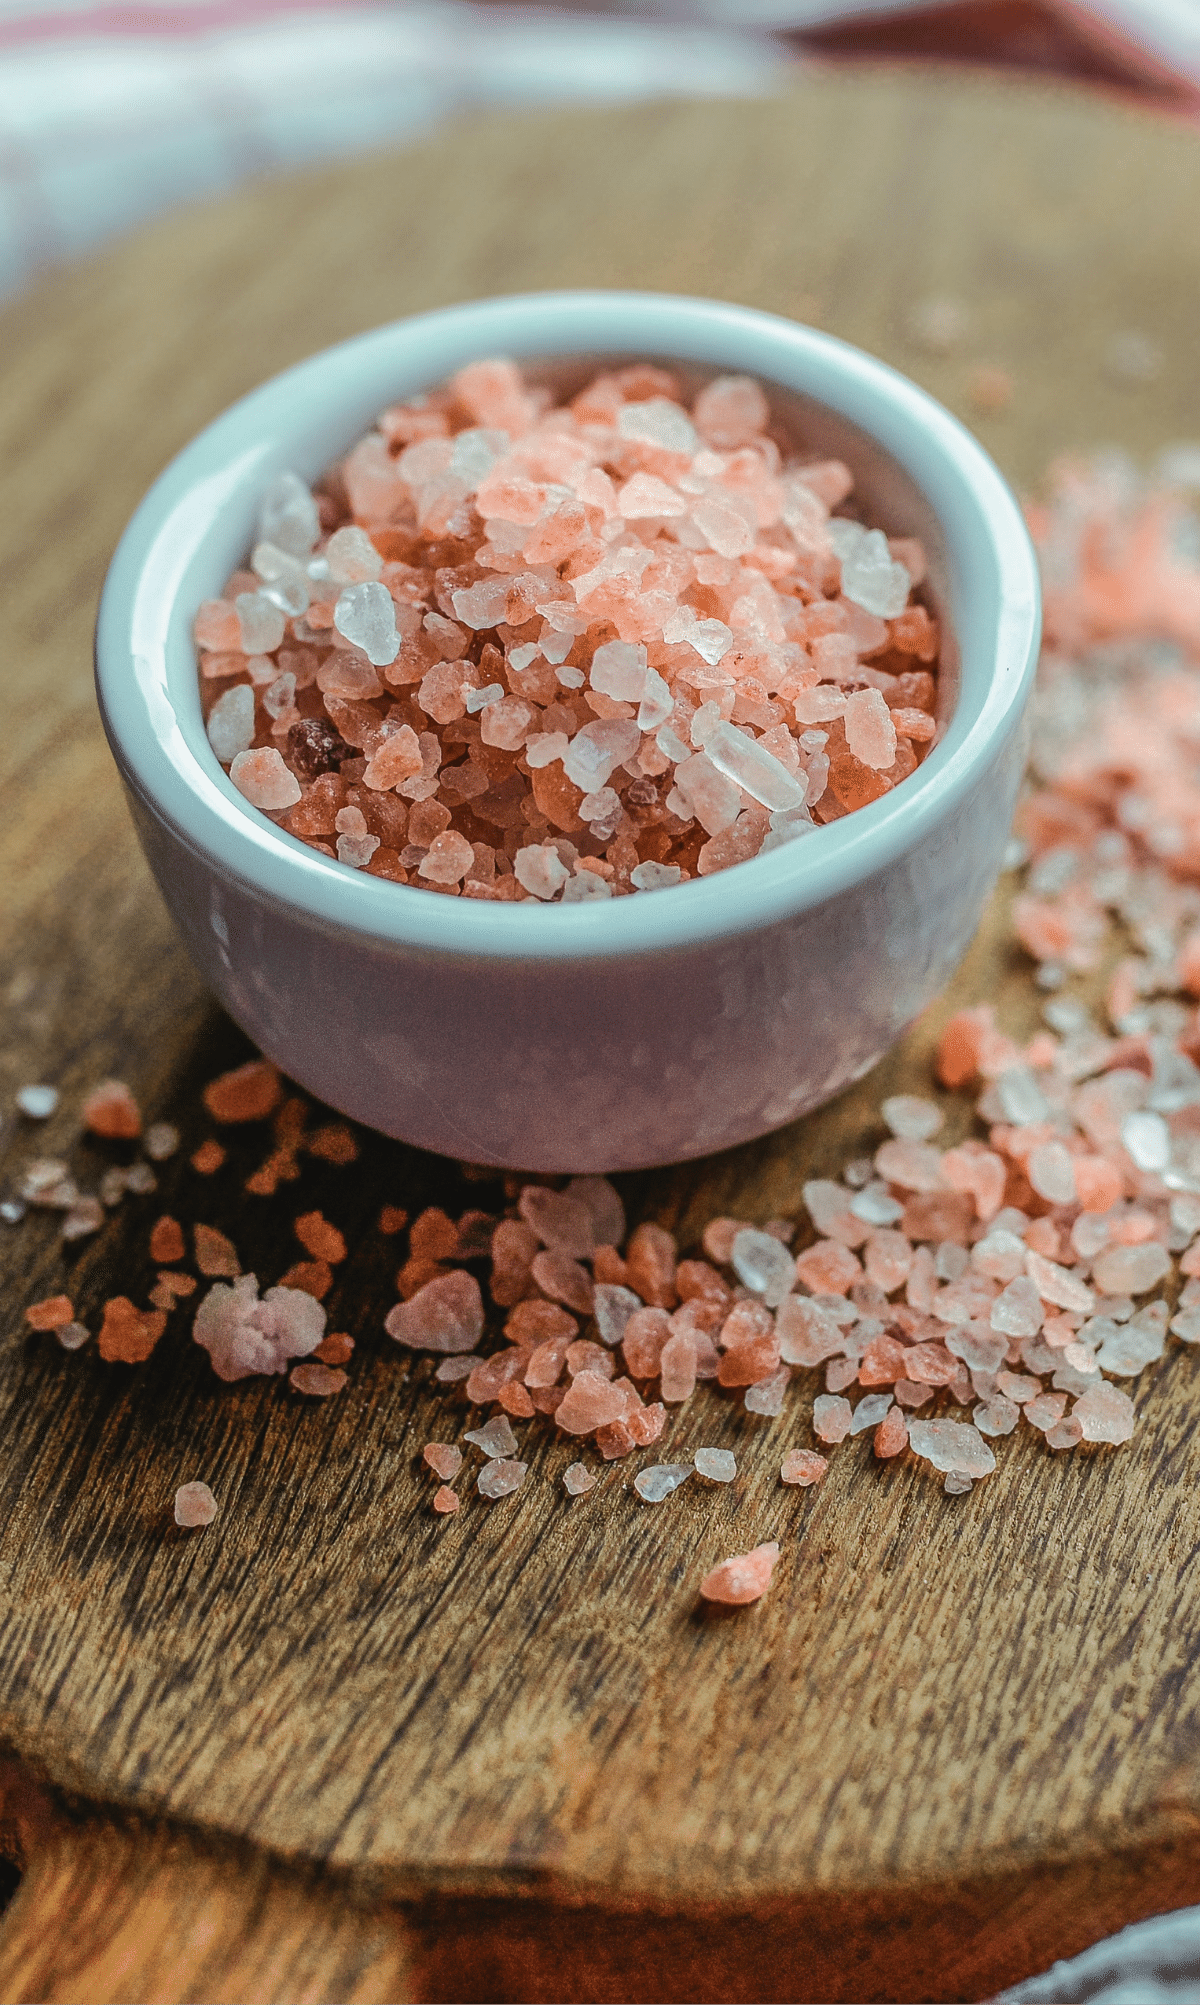 Smoked Salt: The Best Way to Add Flavor to Your Next Meal